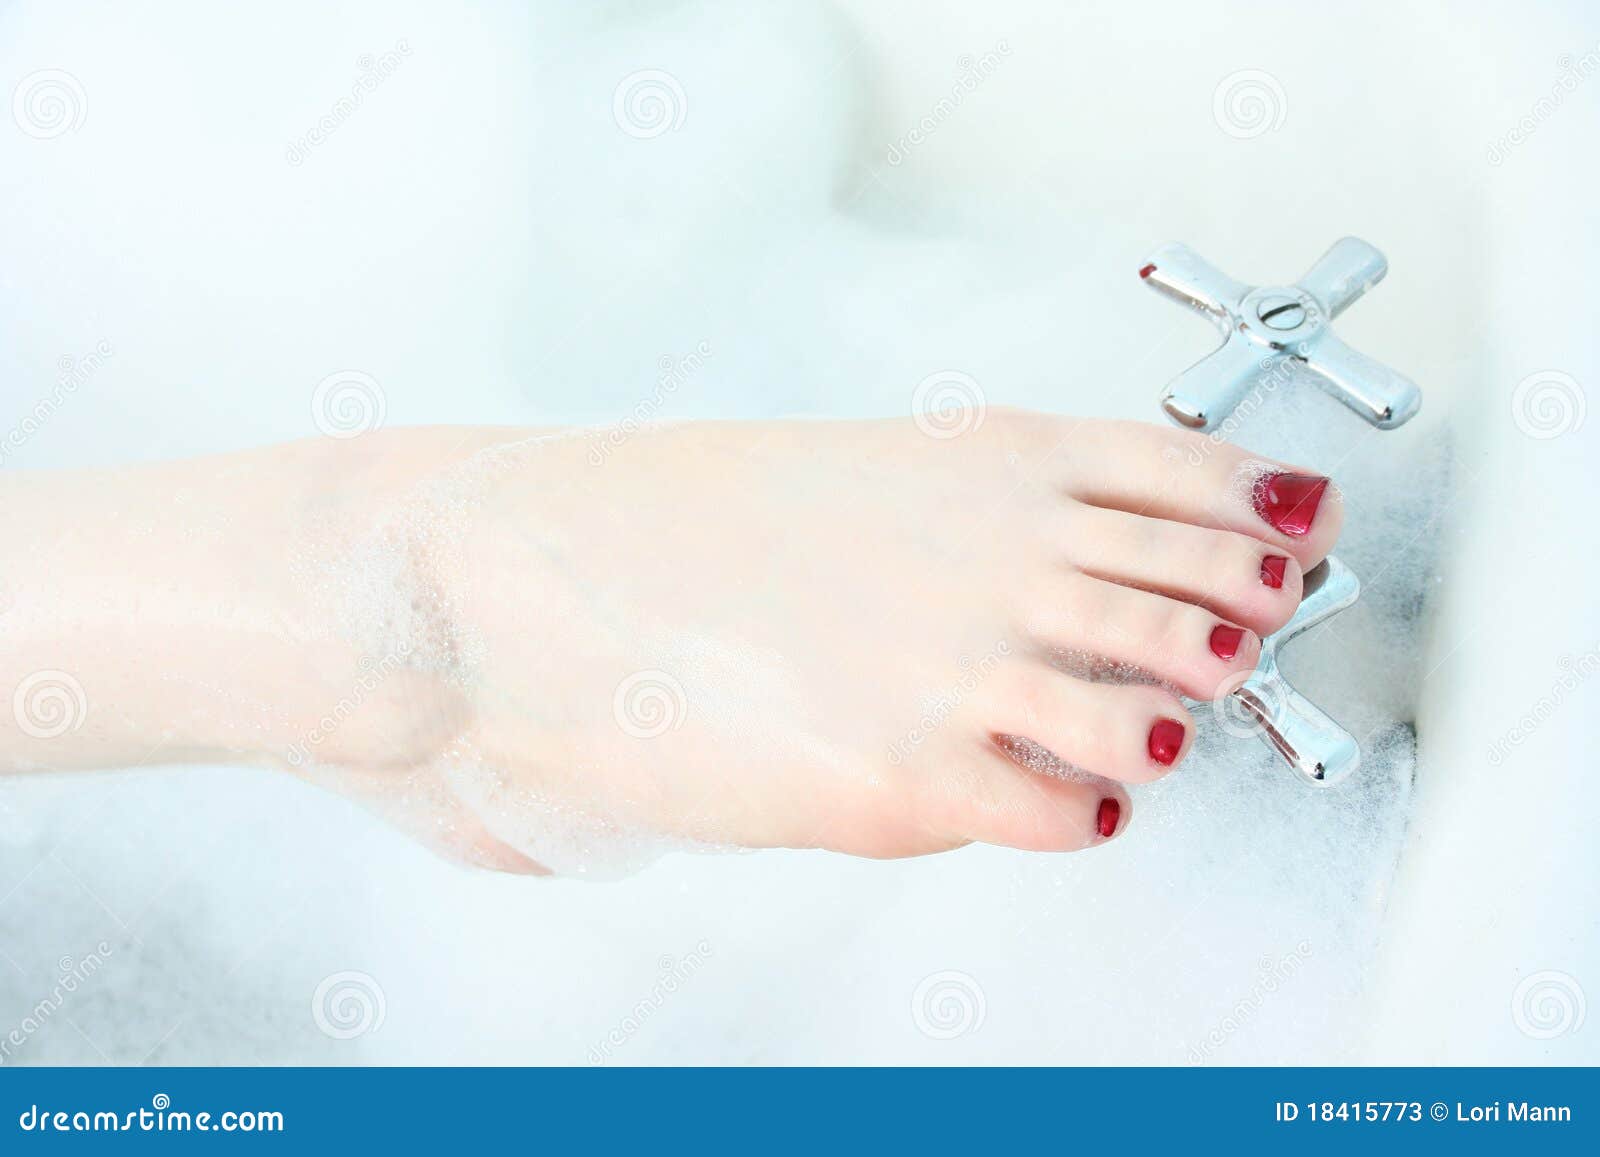 Close-up Of Woman S Foot In Bubble Bath. Stock Image - Image of toes